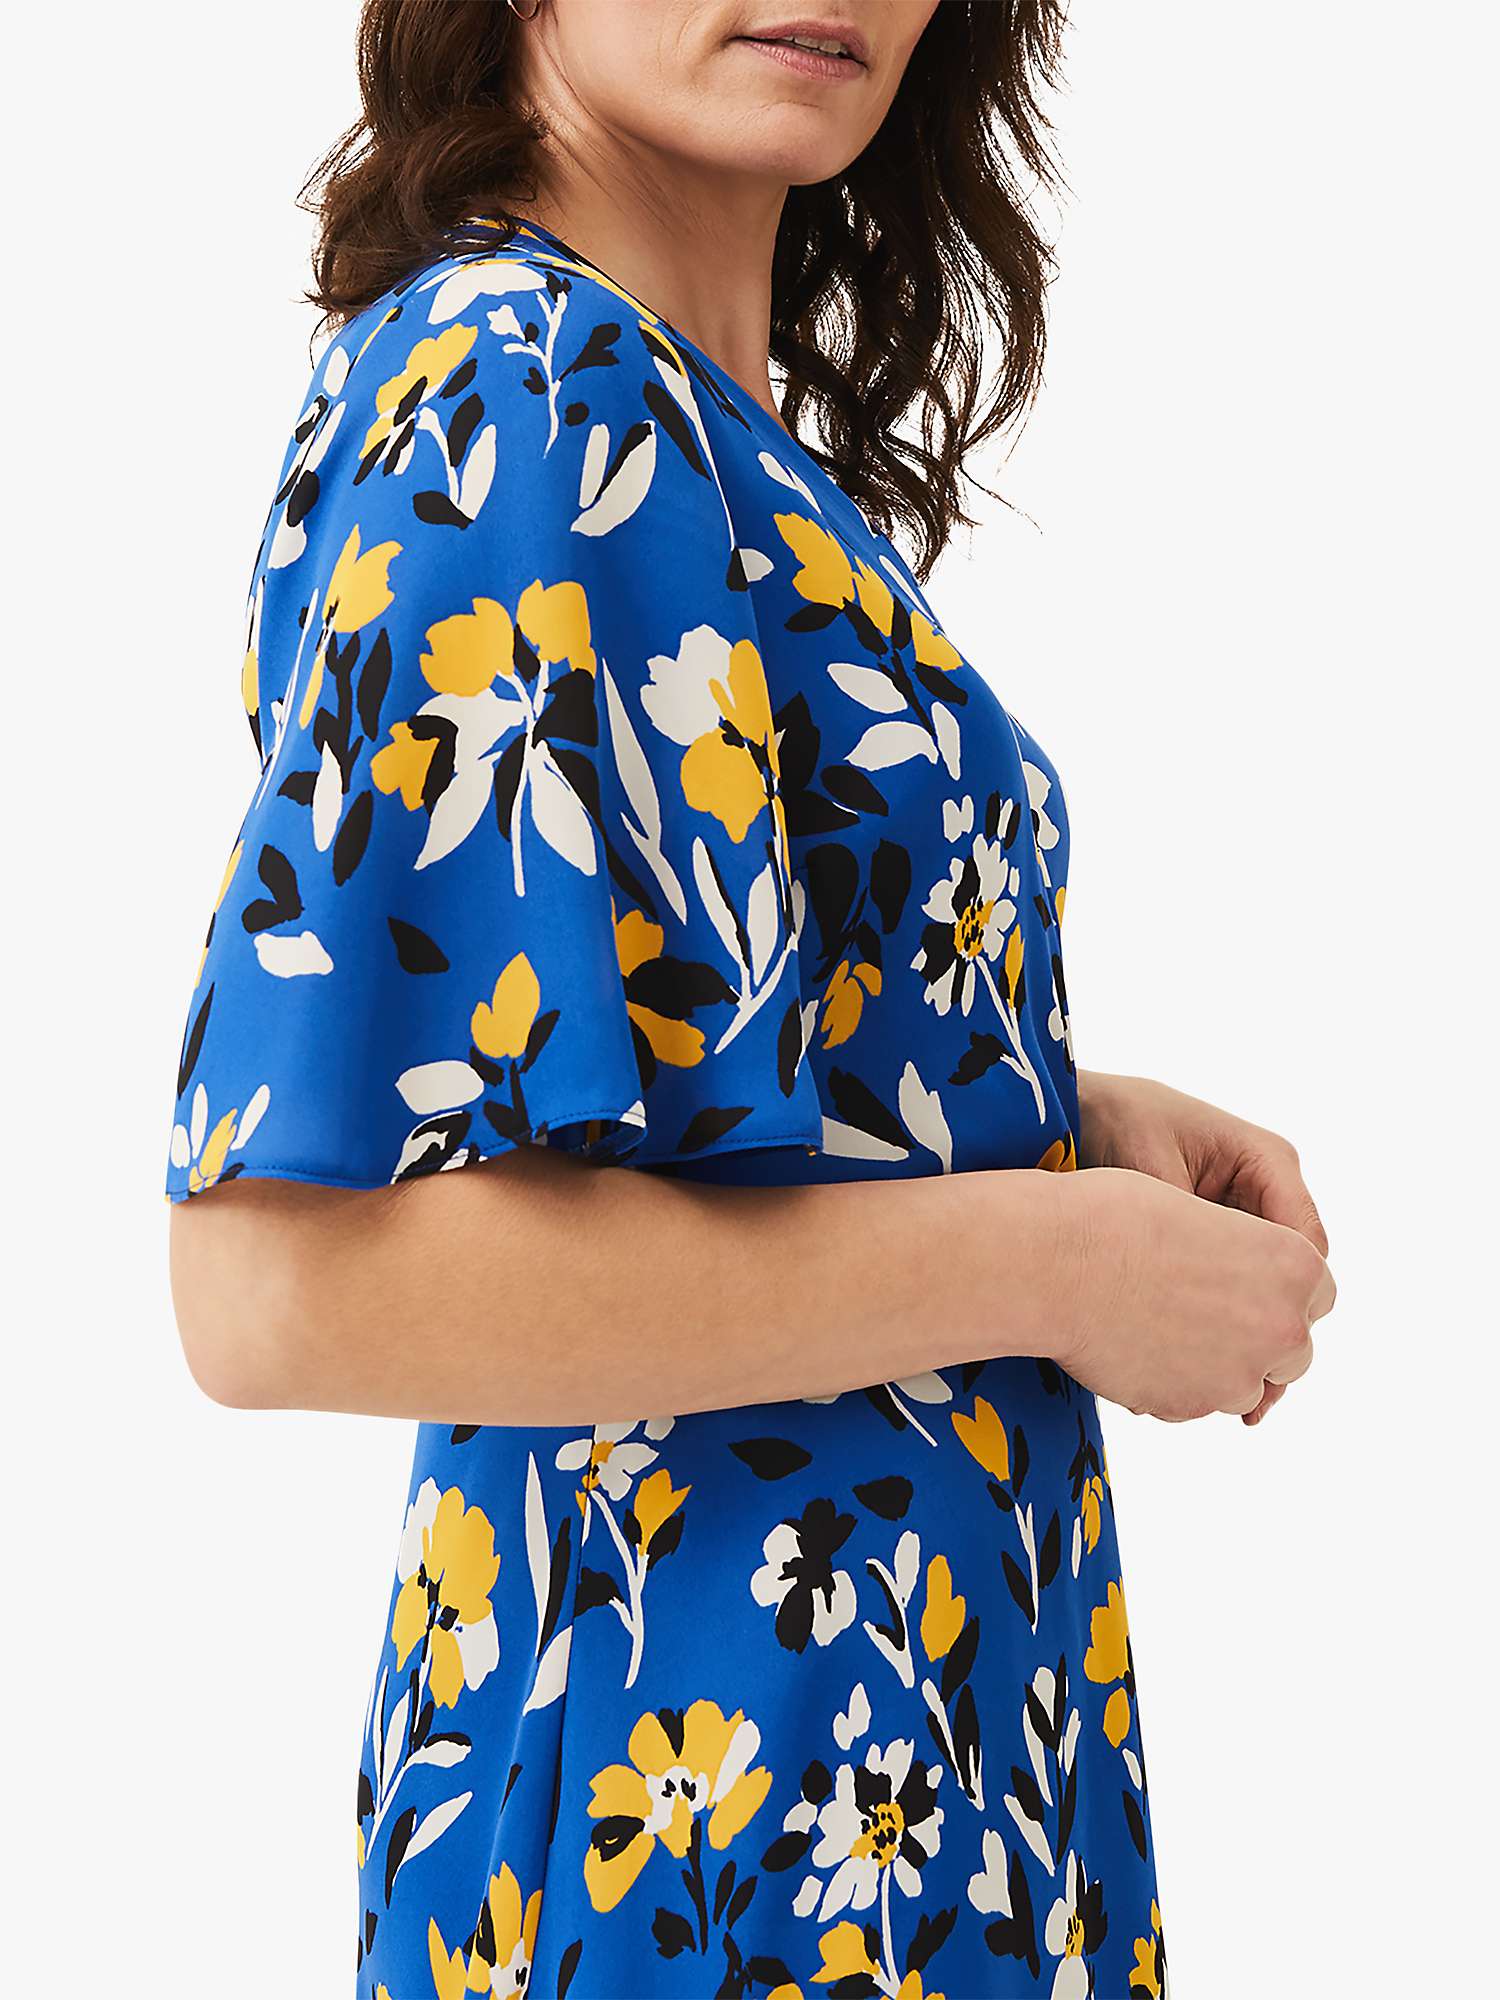 Buy Phase Eight Jayla Floral Print Dress, Almond/Canary Online at johnlewis.com